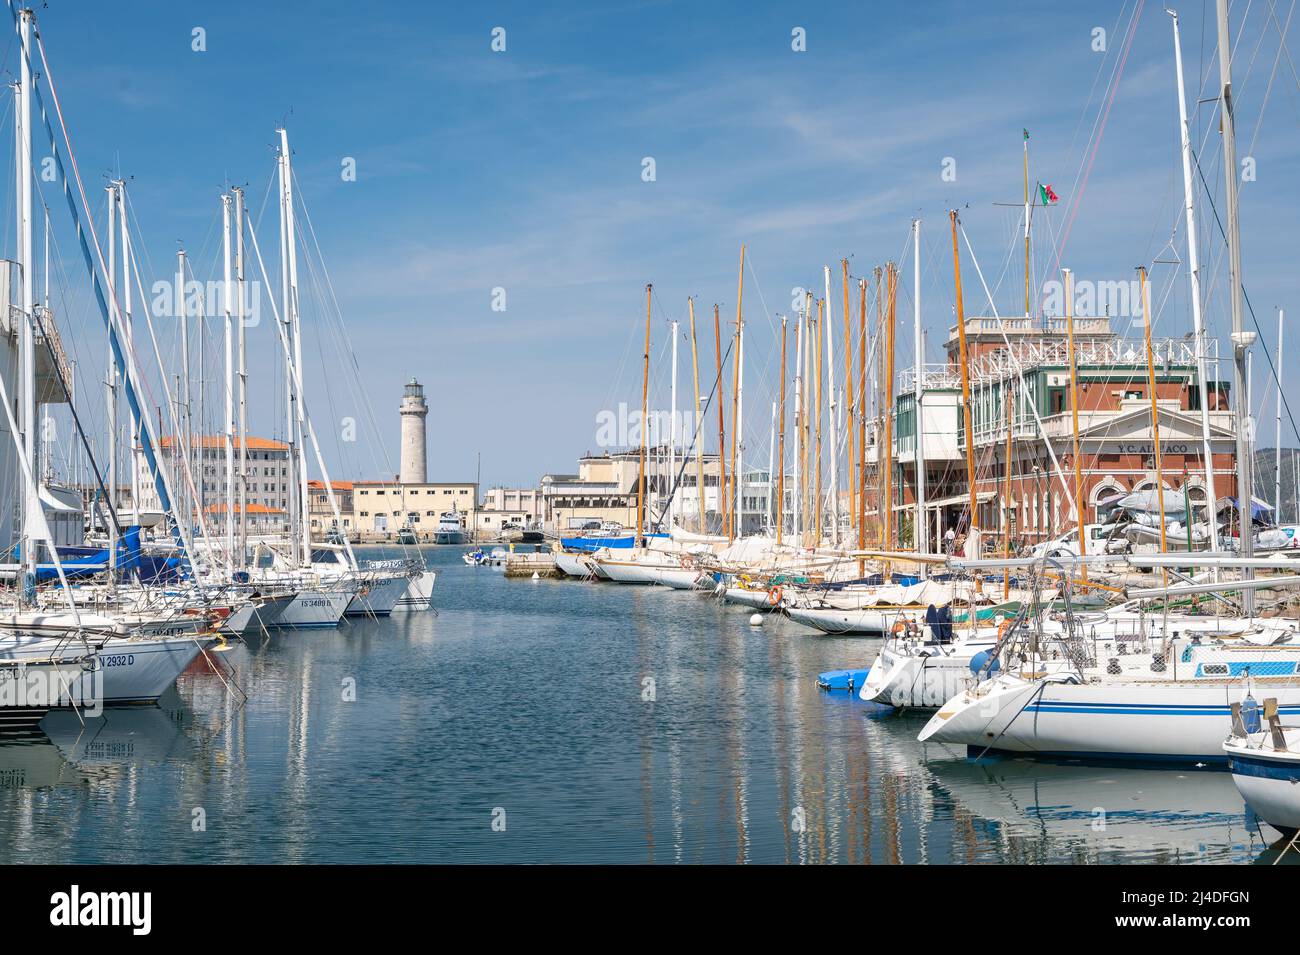 View of the Trieste Marina, Italy Stock Photo